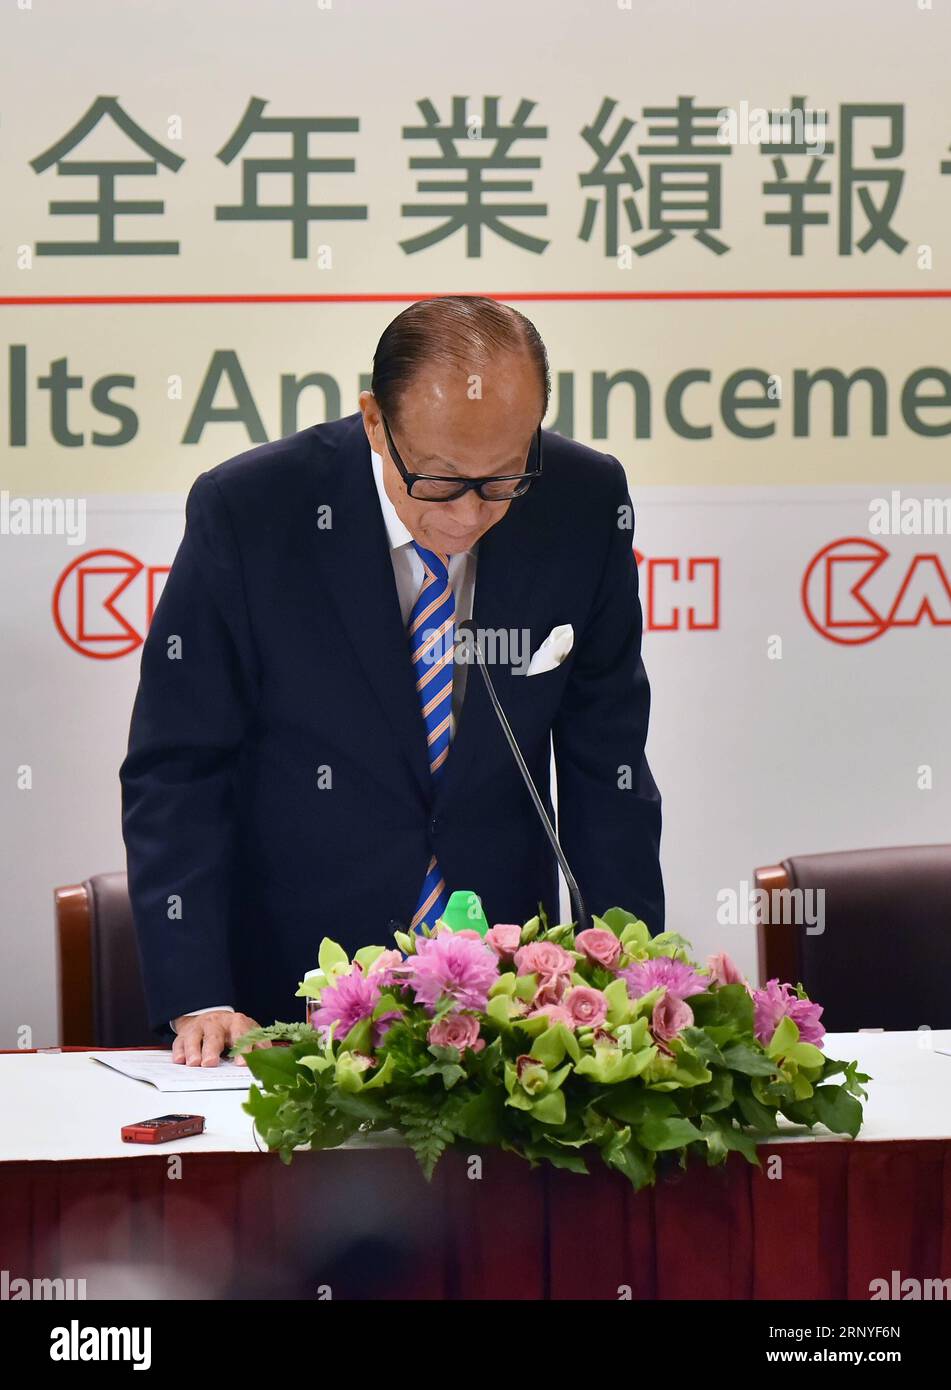 (180316) -- HONG KONG, March 16, 2018 -- Hong Kong tycoon Li Ka-shing attends a press conference in south China s Hong Kong, March 16, 2018. Li Ka-shing said on Friday that he is retiring from his business empire. Li said he would officially step down as the chairman of CK Hutchison Holdings Ltd. and CK Asset holdings Ltd. at the annual general meeting of the company on May 10 and would serve as a senior adviser. He will be succeeded by his elder son Victor Li Tzar Kuoi. ) (lmm) CHINA-HONG KONG-BUSINESS-LI KA-SHING-RETIREMENT (CN) WangxXi PUBLICATIONxNOTxINxCHN Stock Photo